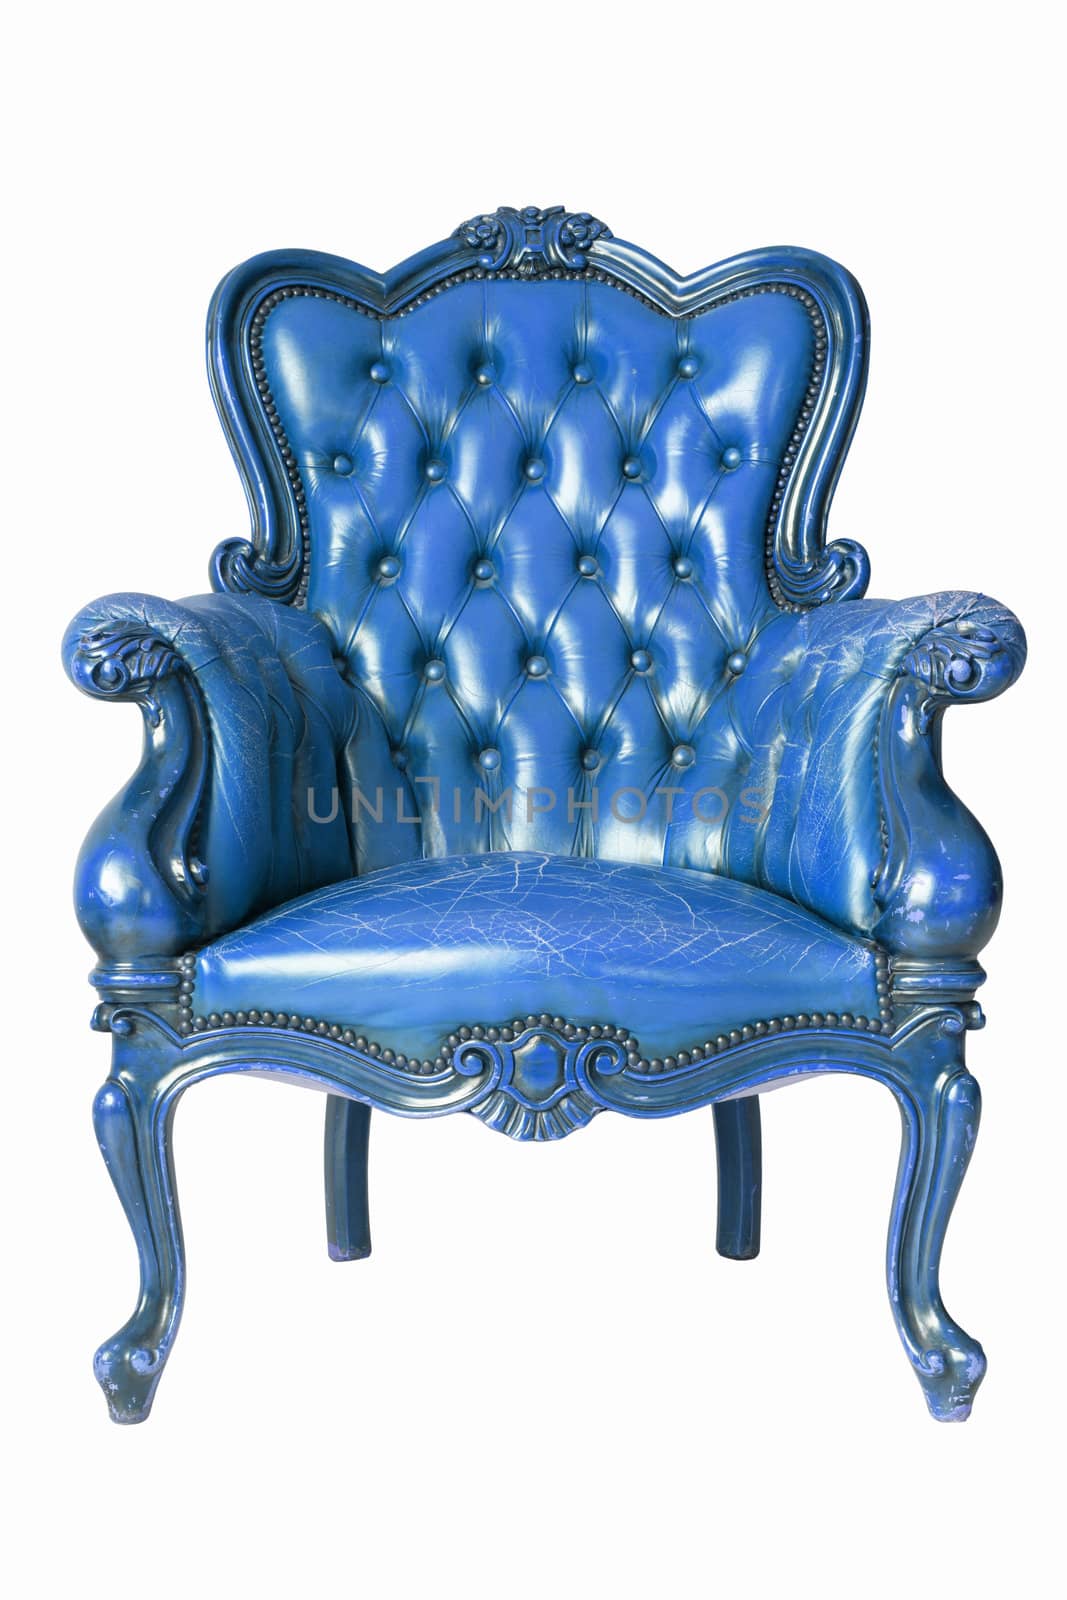 Armchair blue genuine leather classical style sofa with clipping path